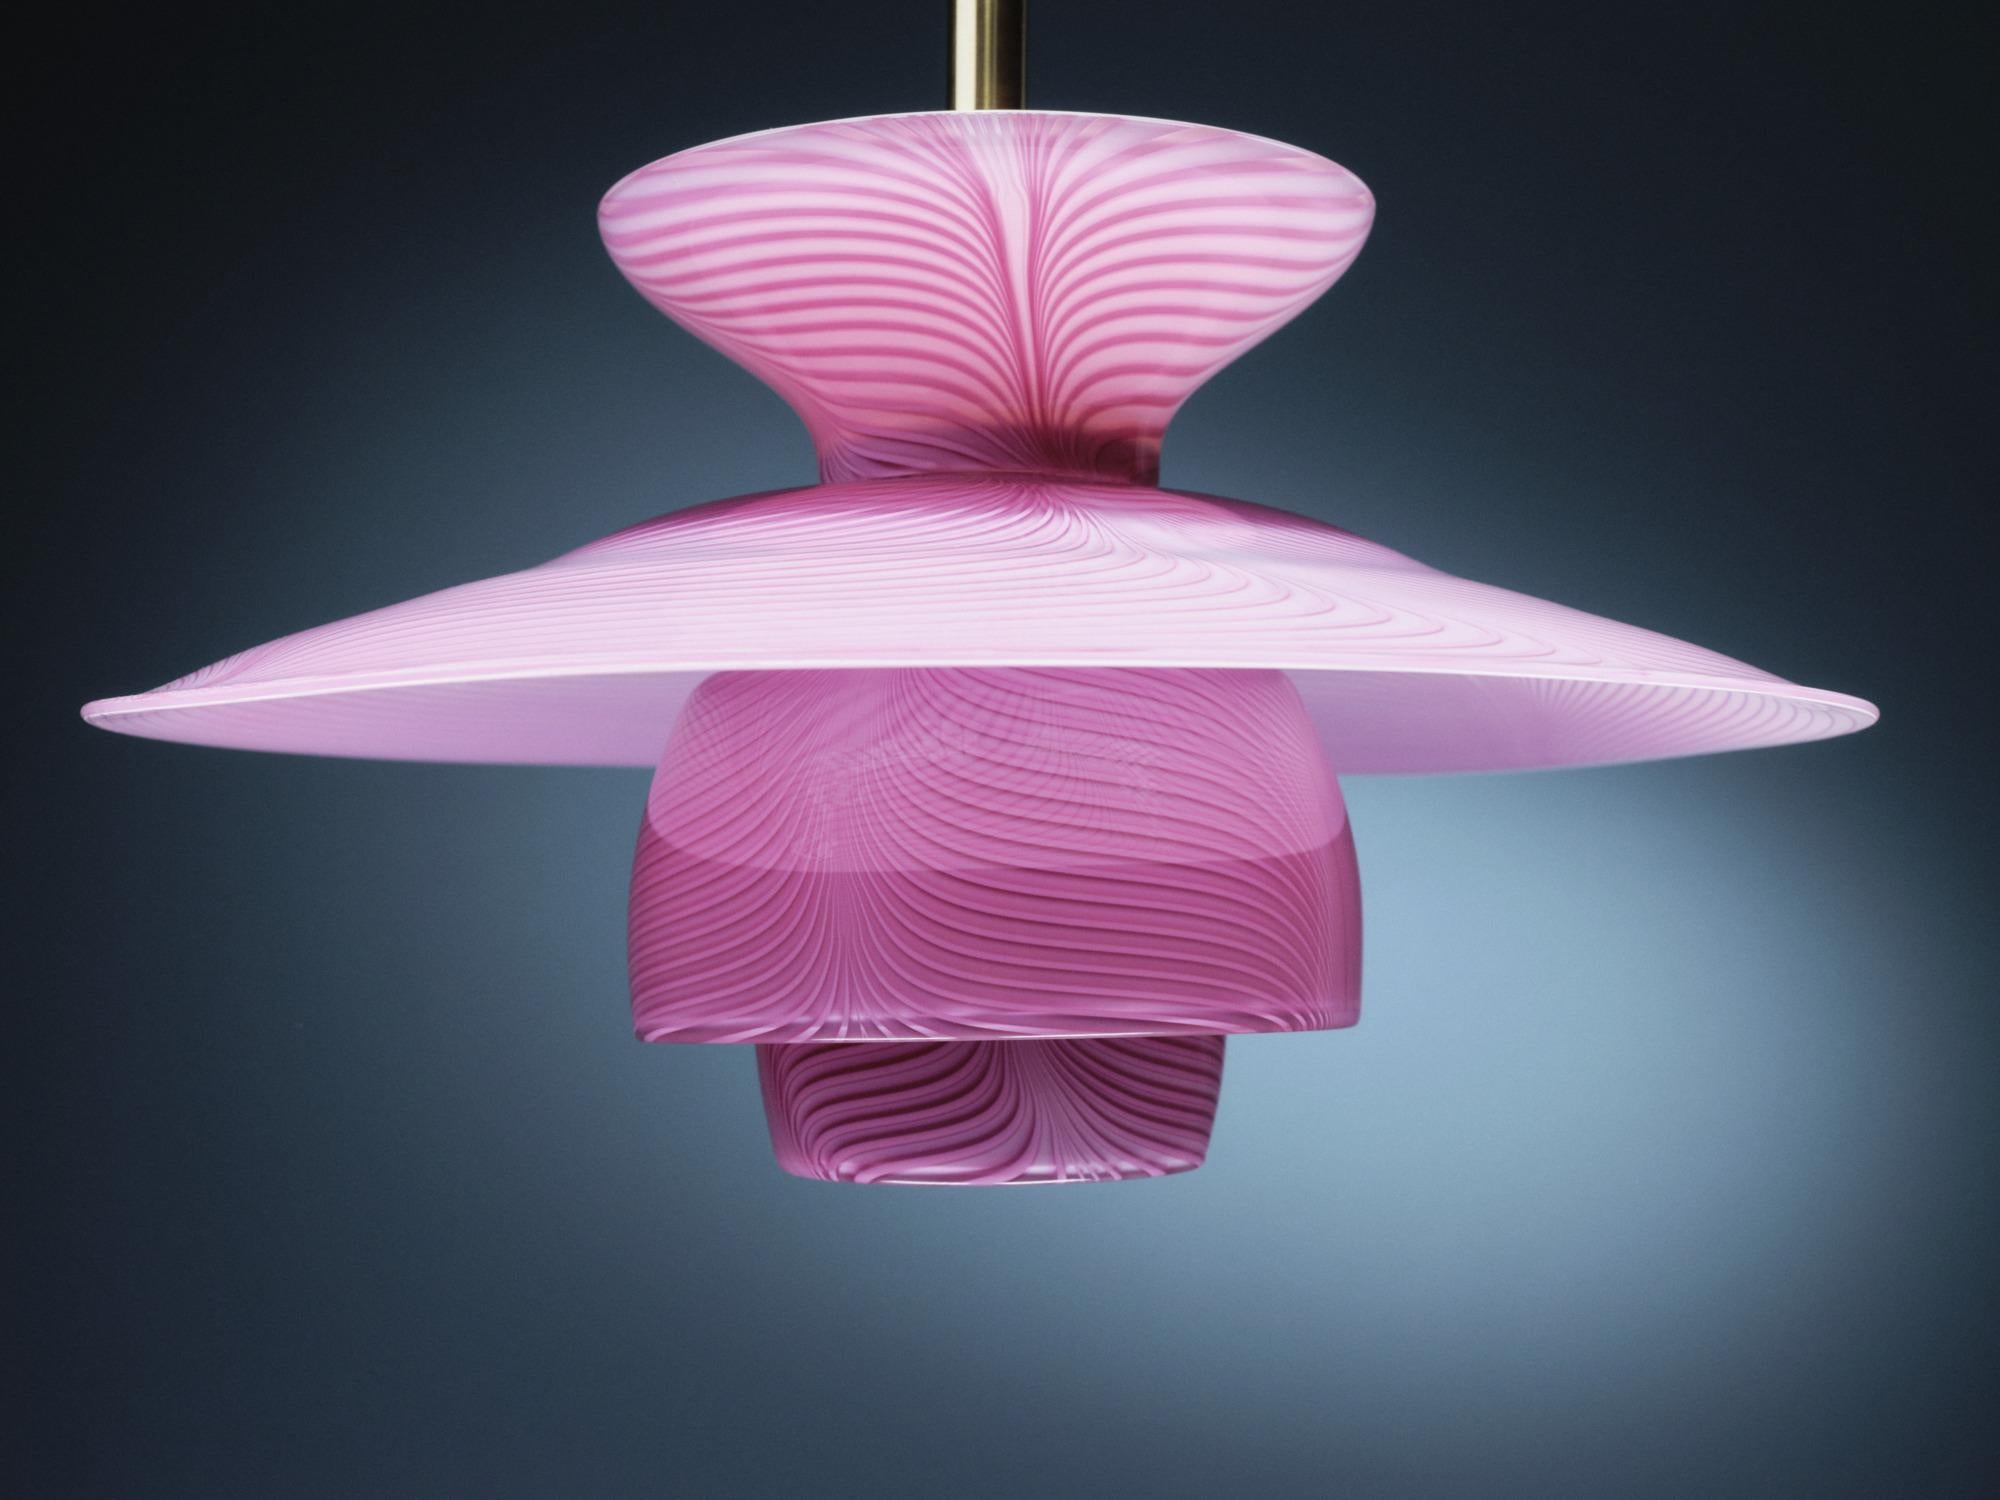 The Filet pendant was designed by New York based glassblowing duo Home in Heven for Louis Poulsen and exhibited at 3daysofdesign 2023 in Copenhagen, Denmark. 

